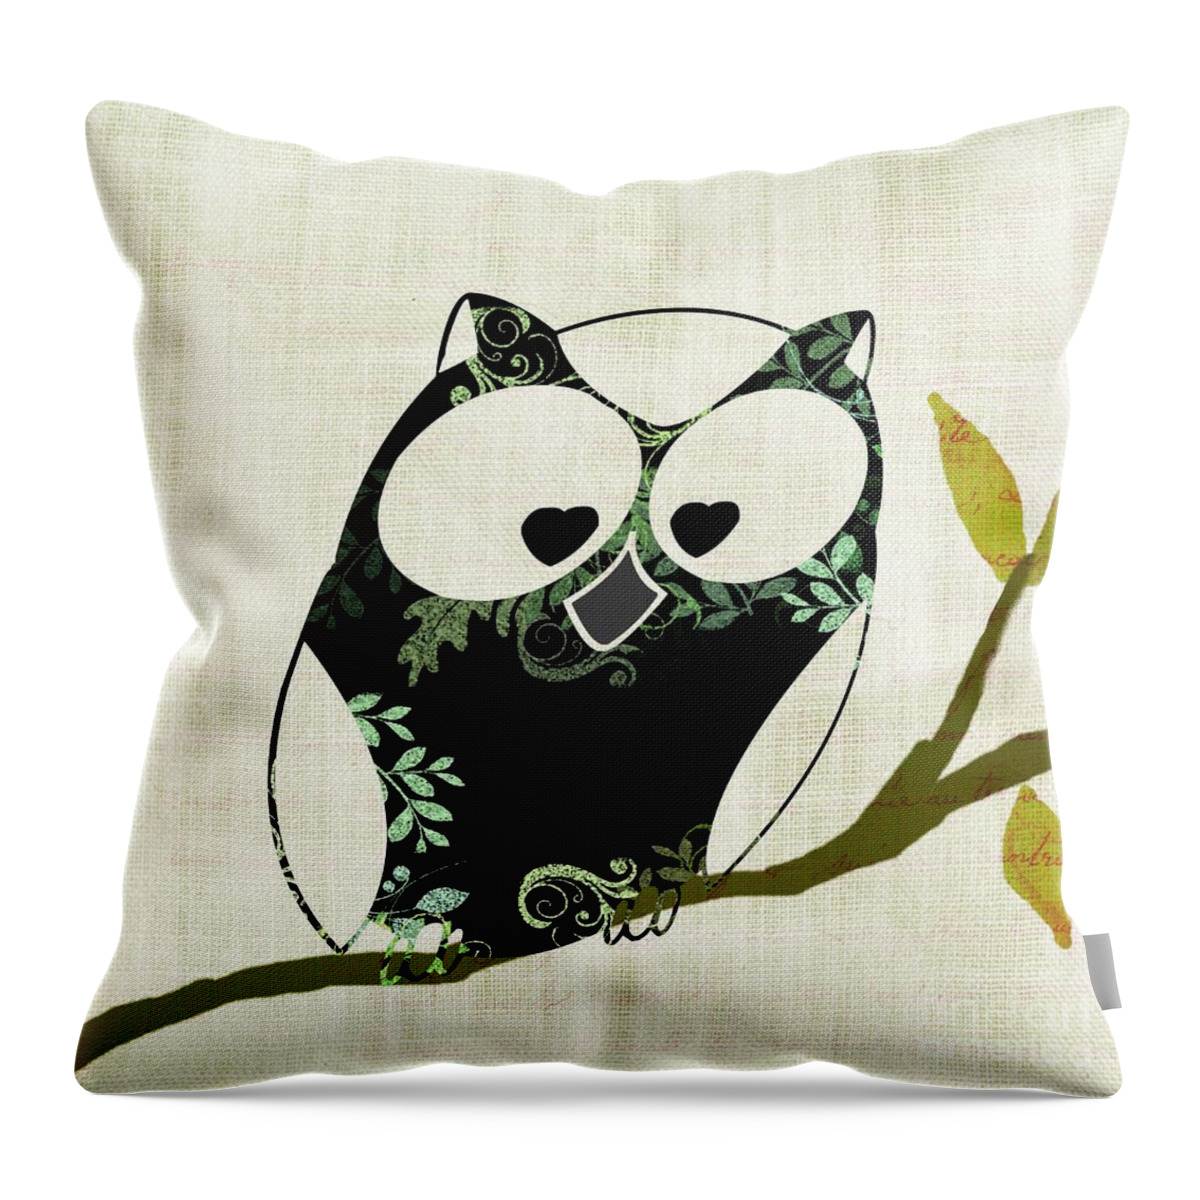 Owl Throw Pillow featuring the digital art Owl Design - 23a by Variance Collections